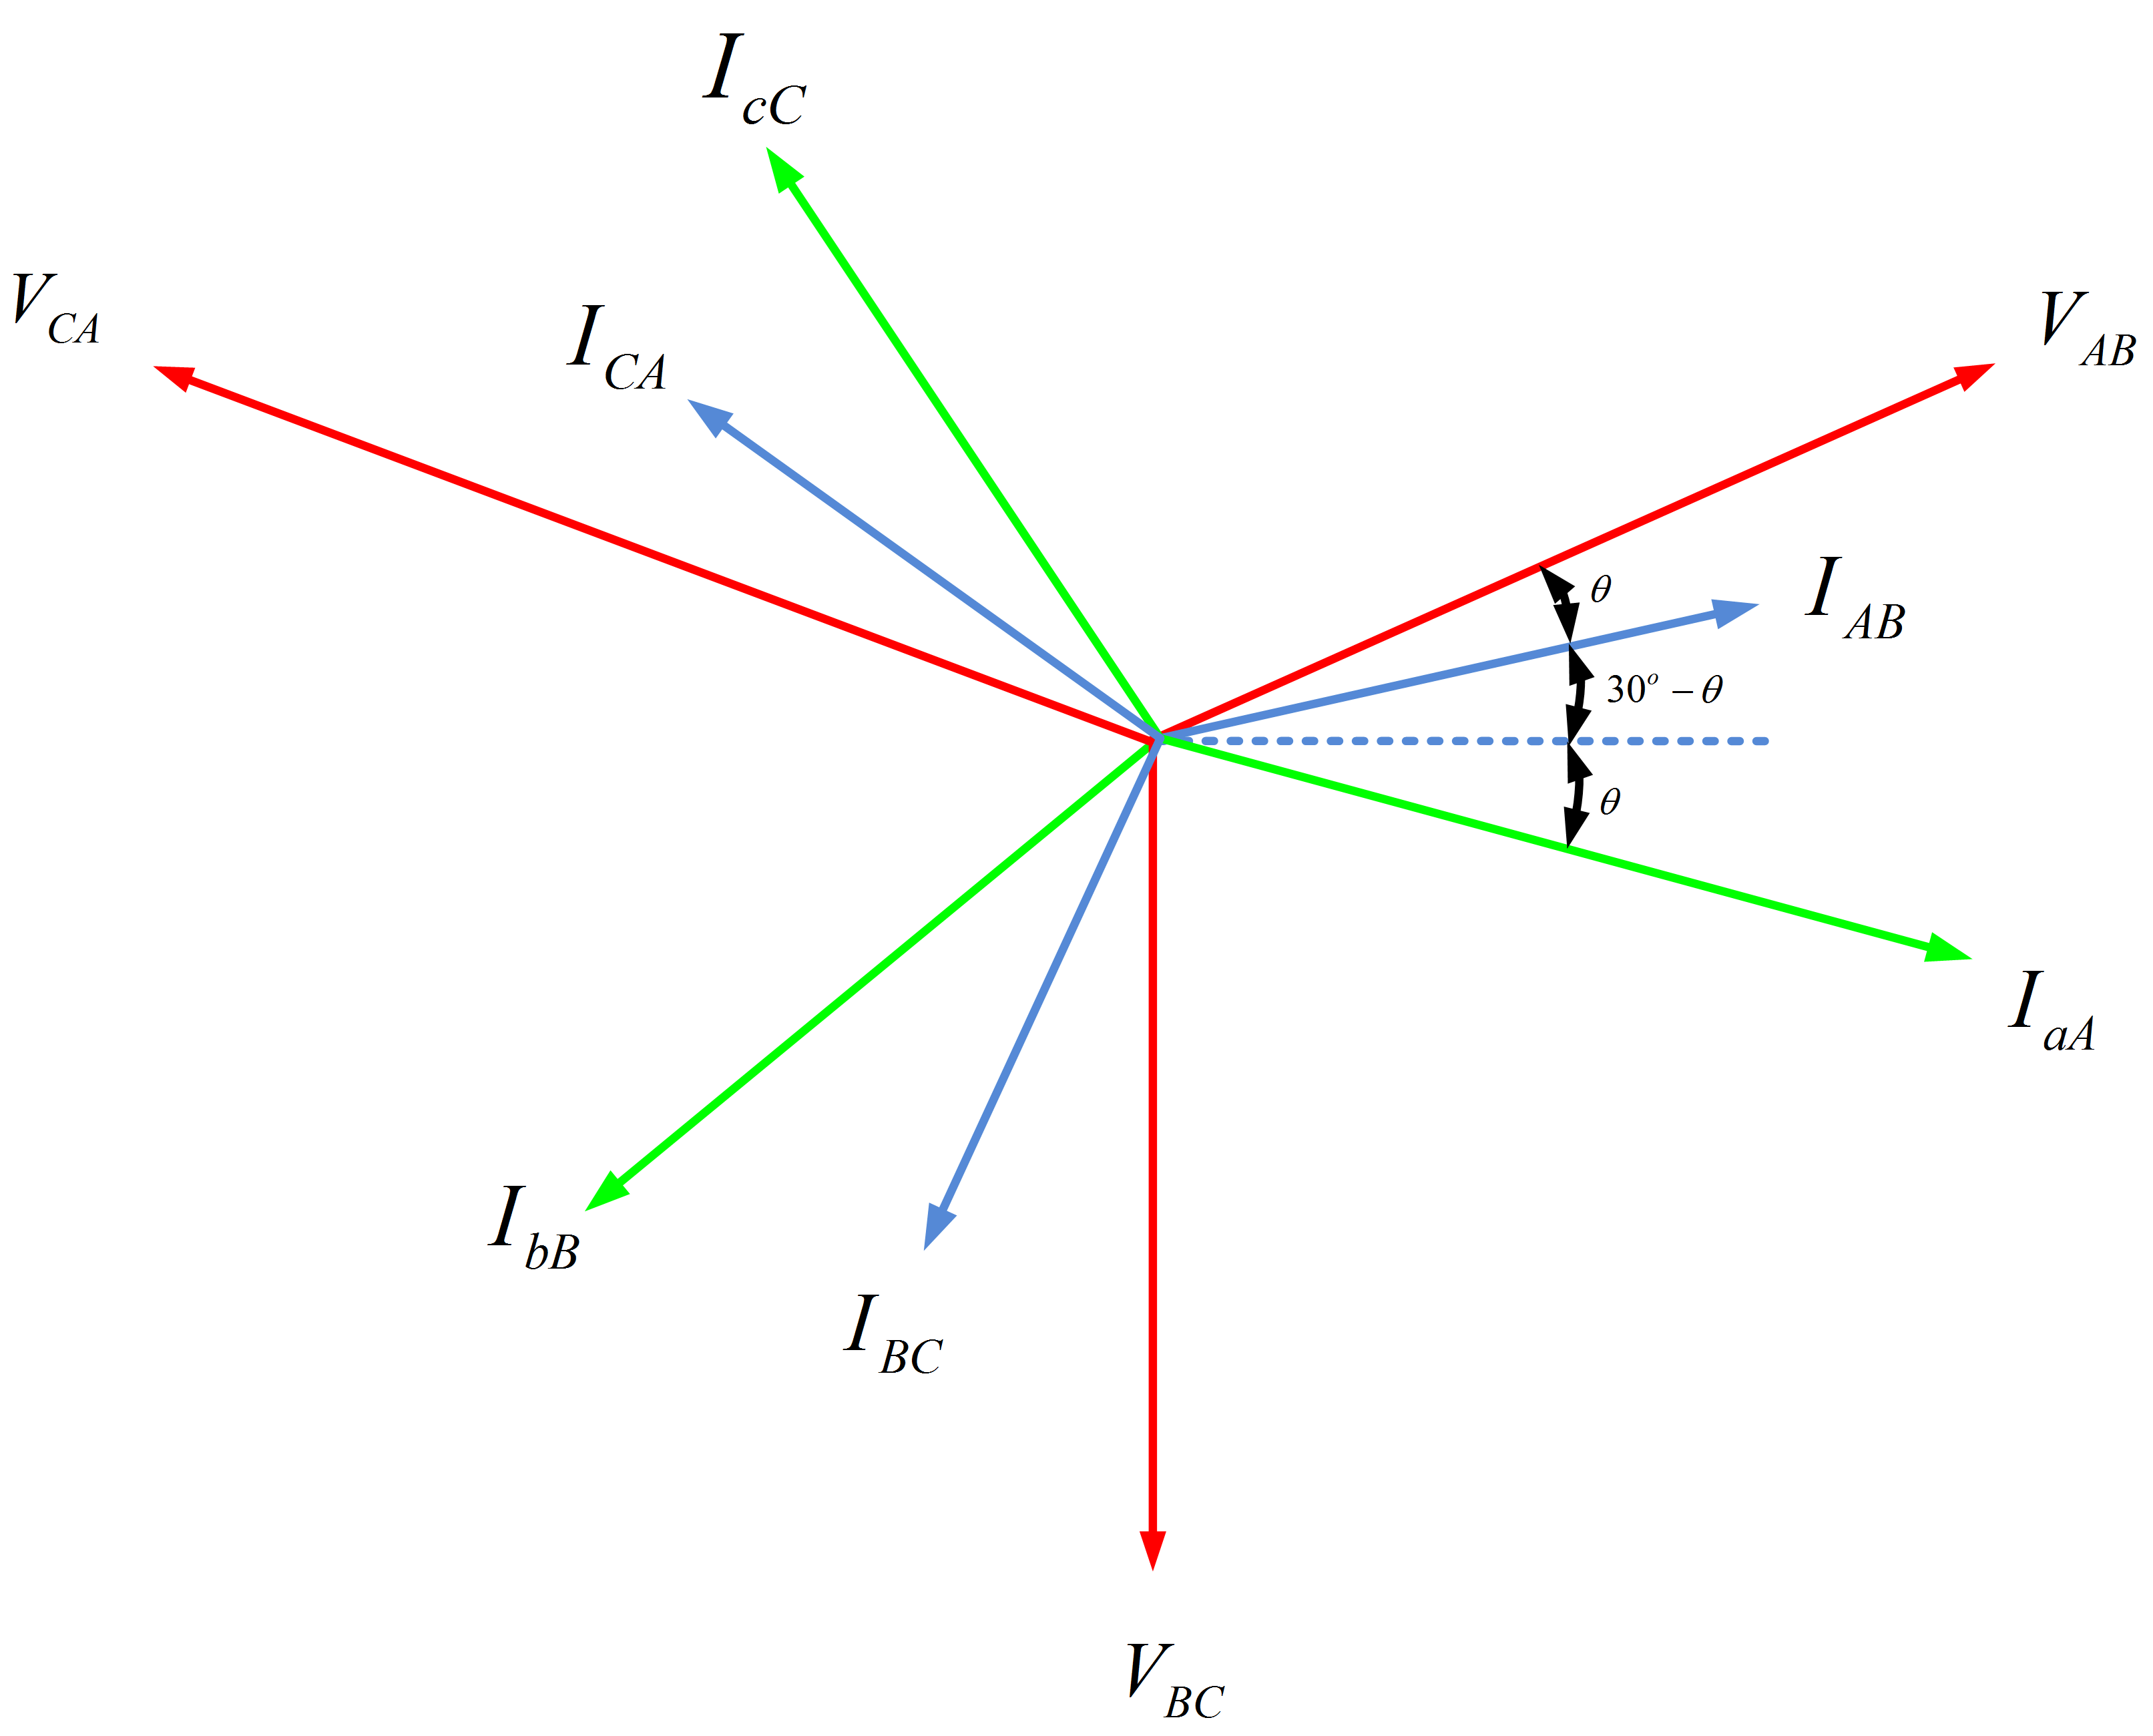 Phasor Diagram for Three Phase Delta-Connection